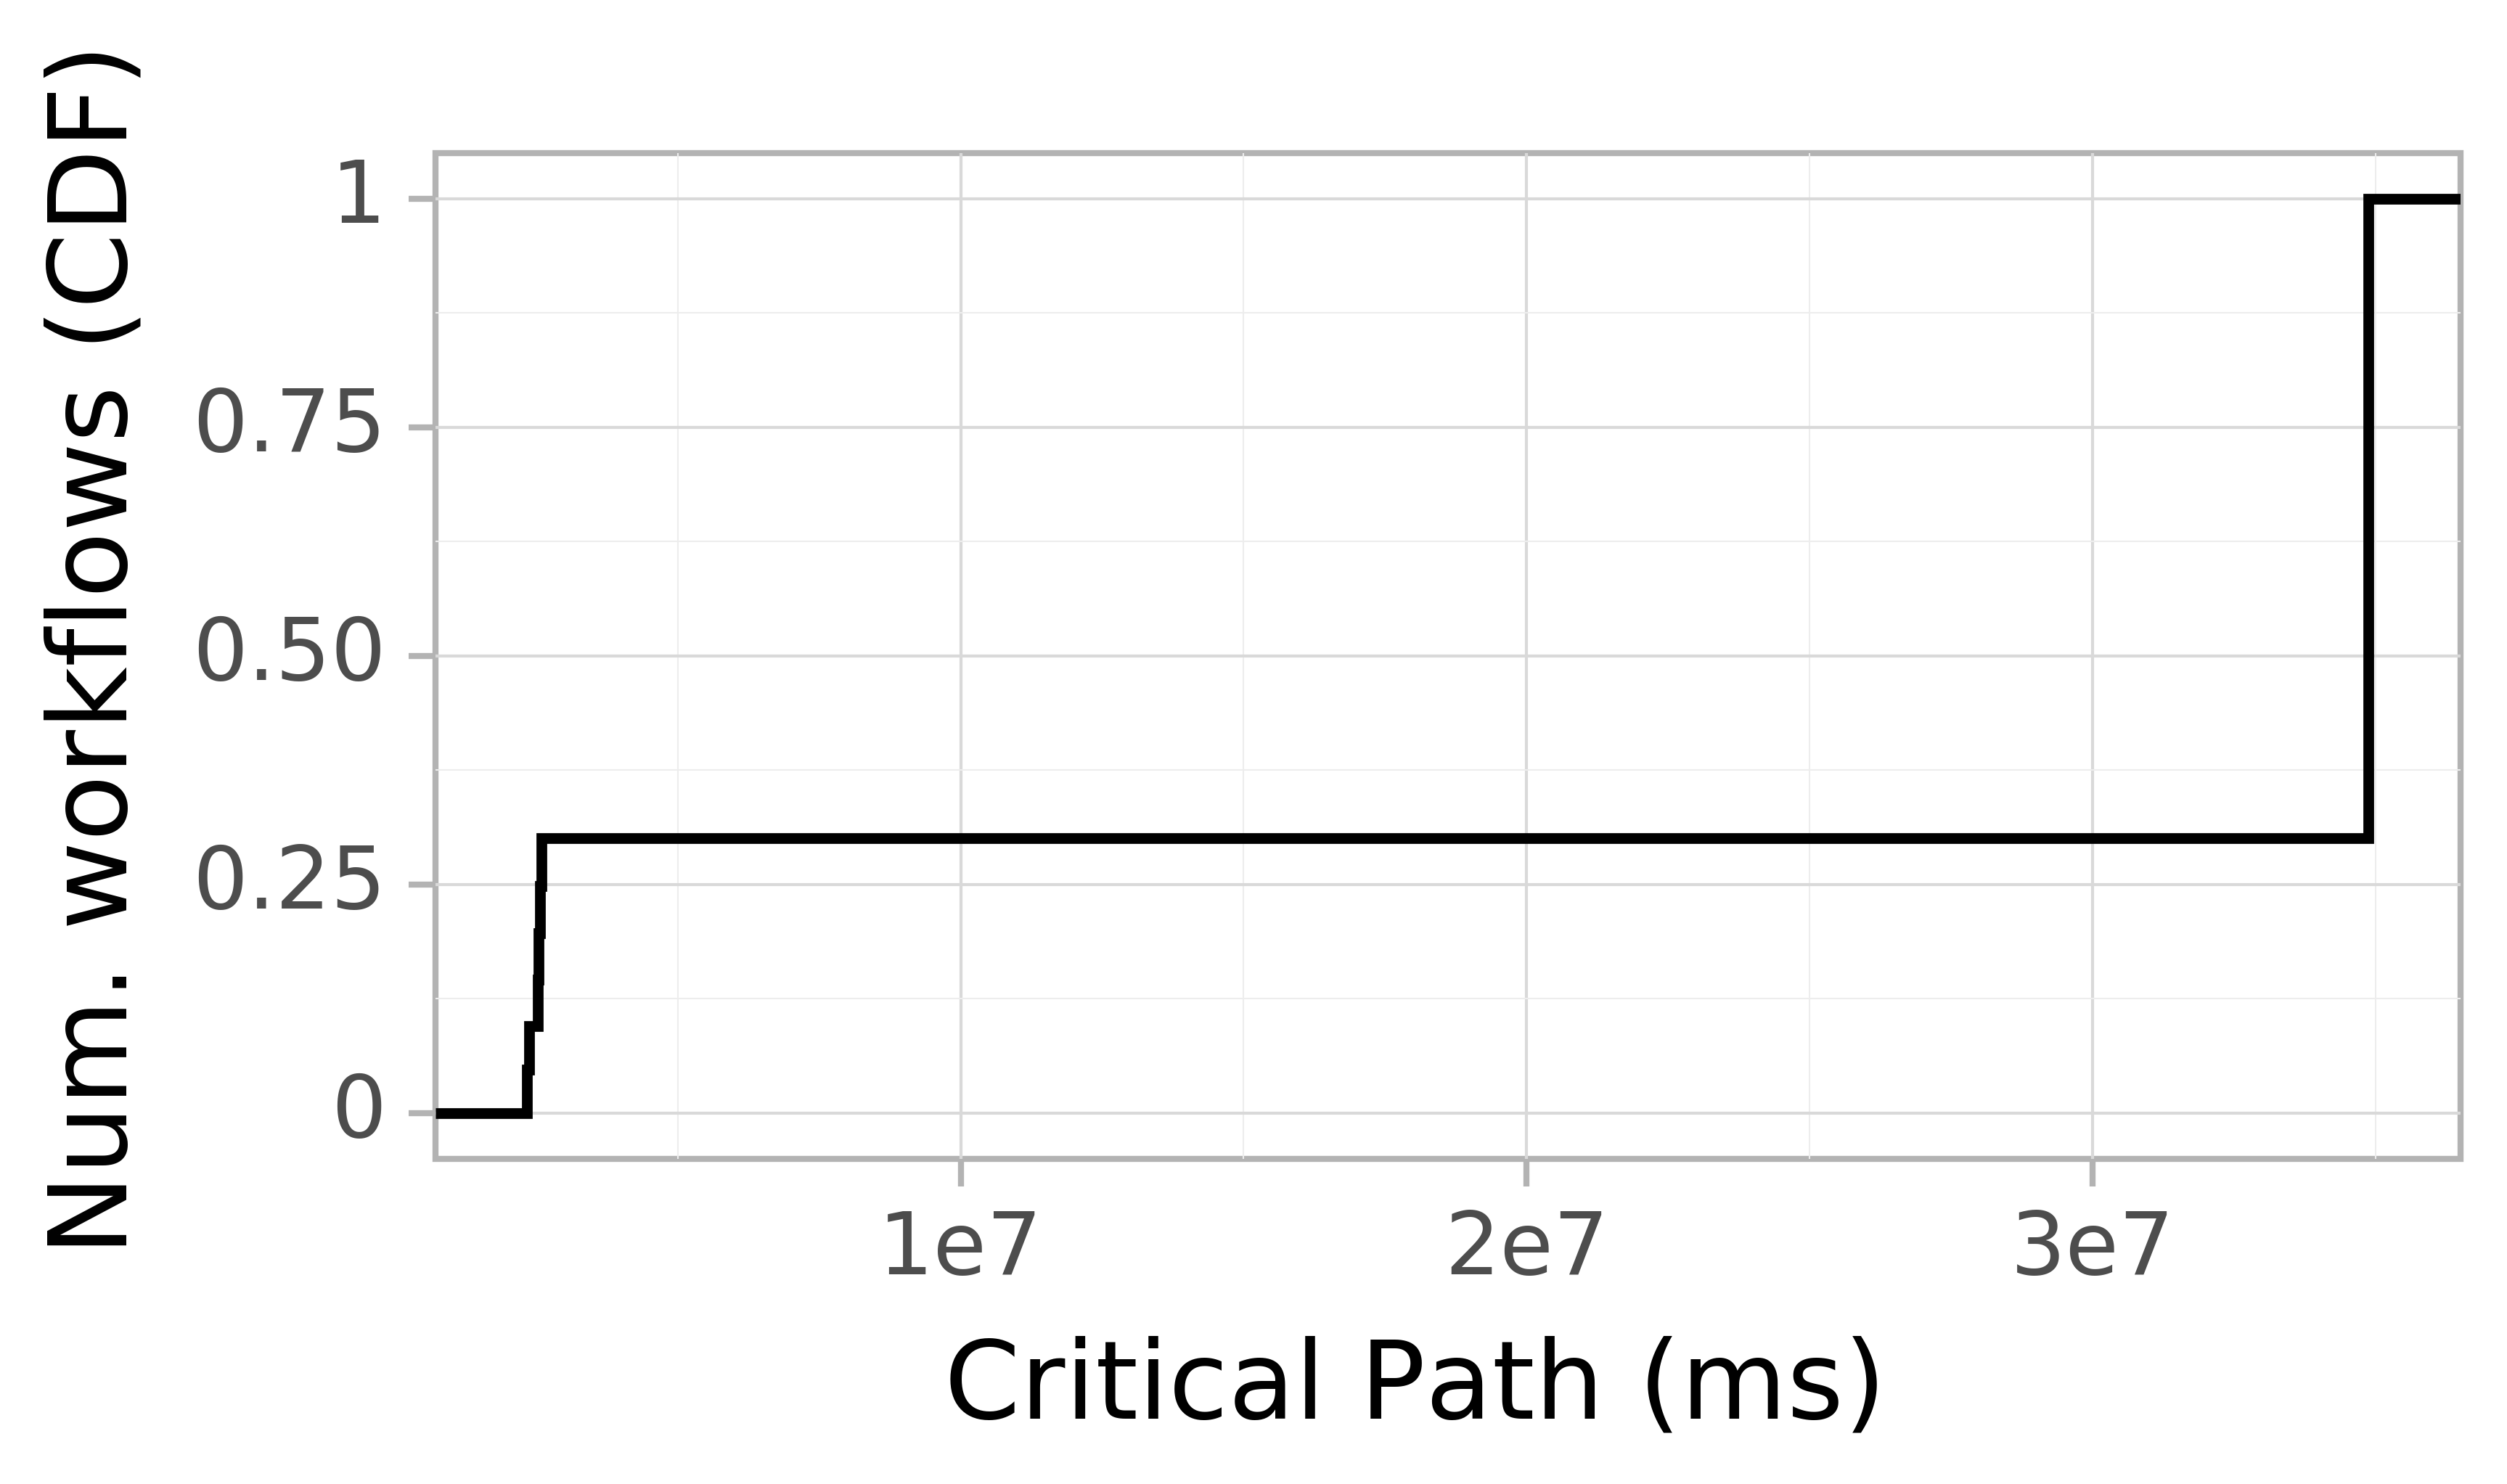 Job runtime CDF graph for the Pegasus_P3 trace.